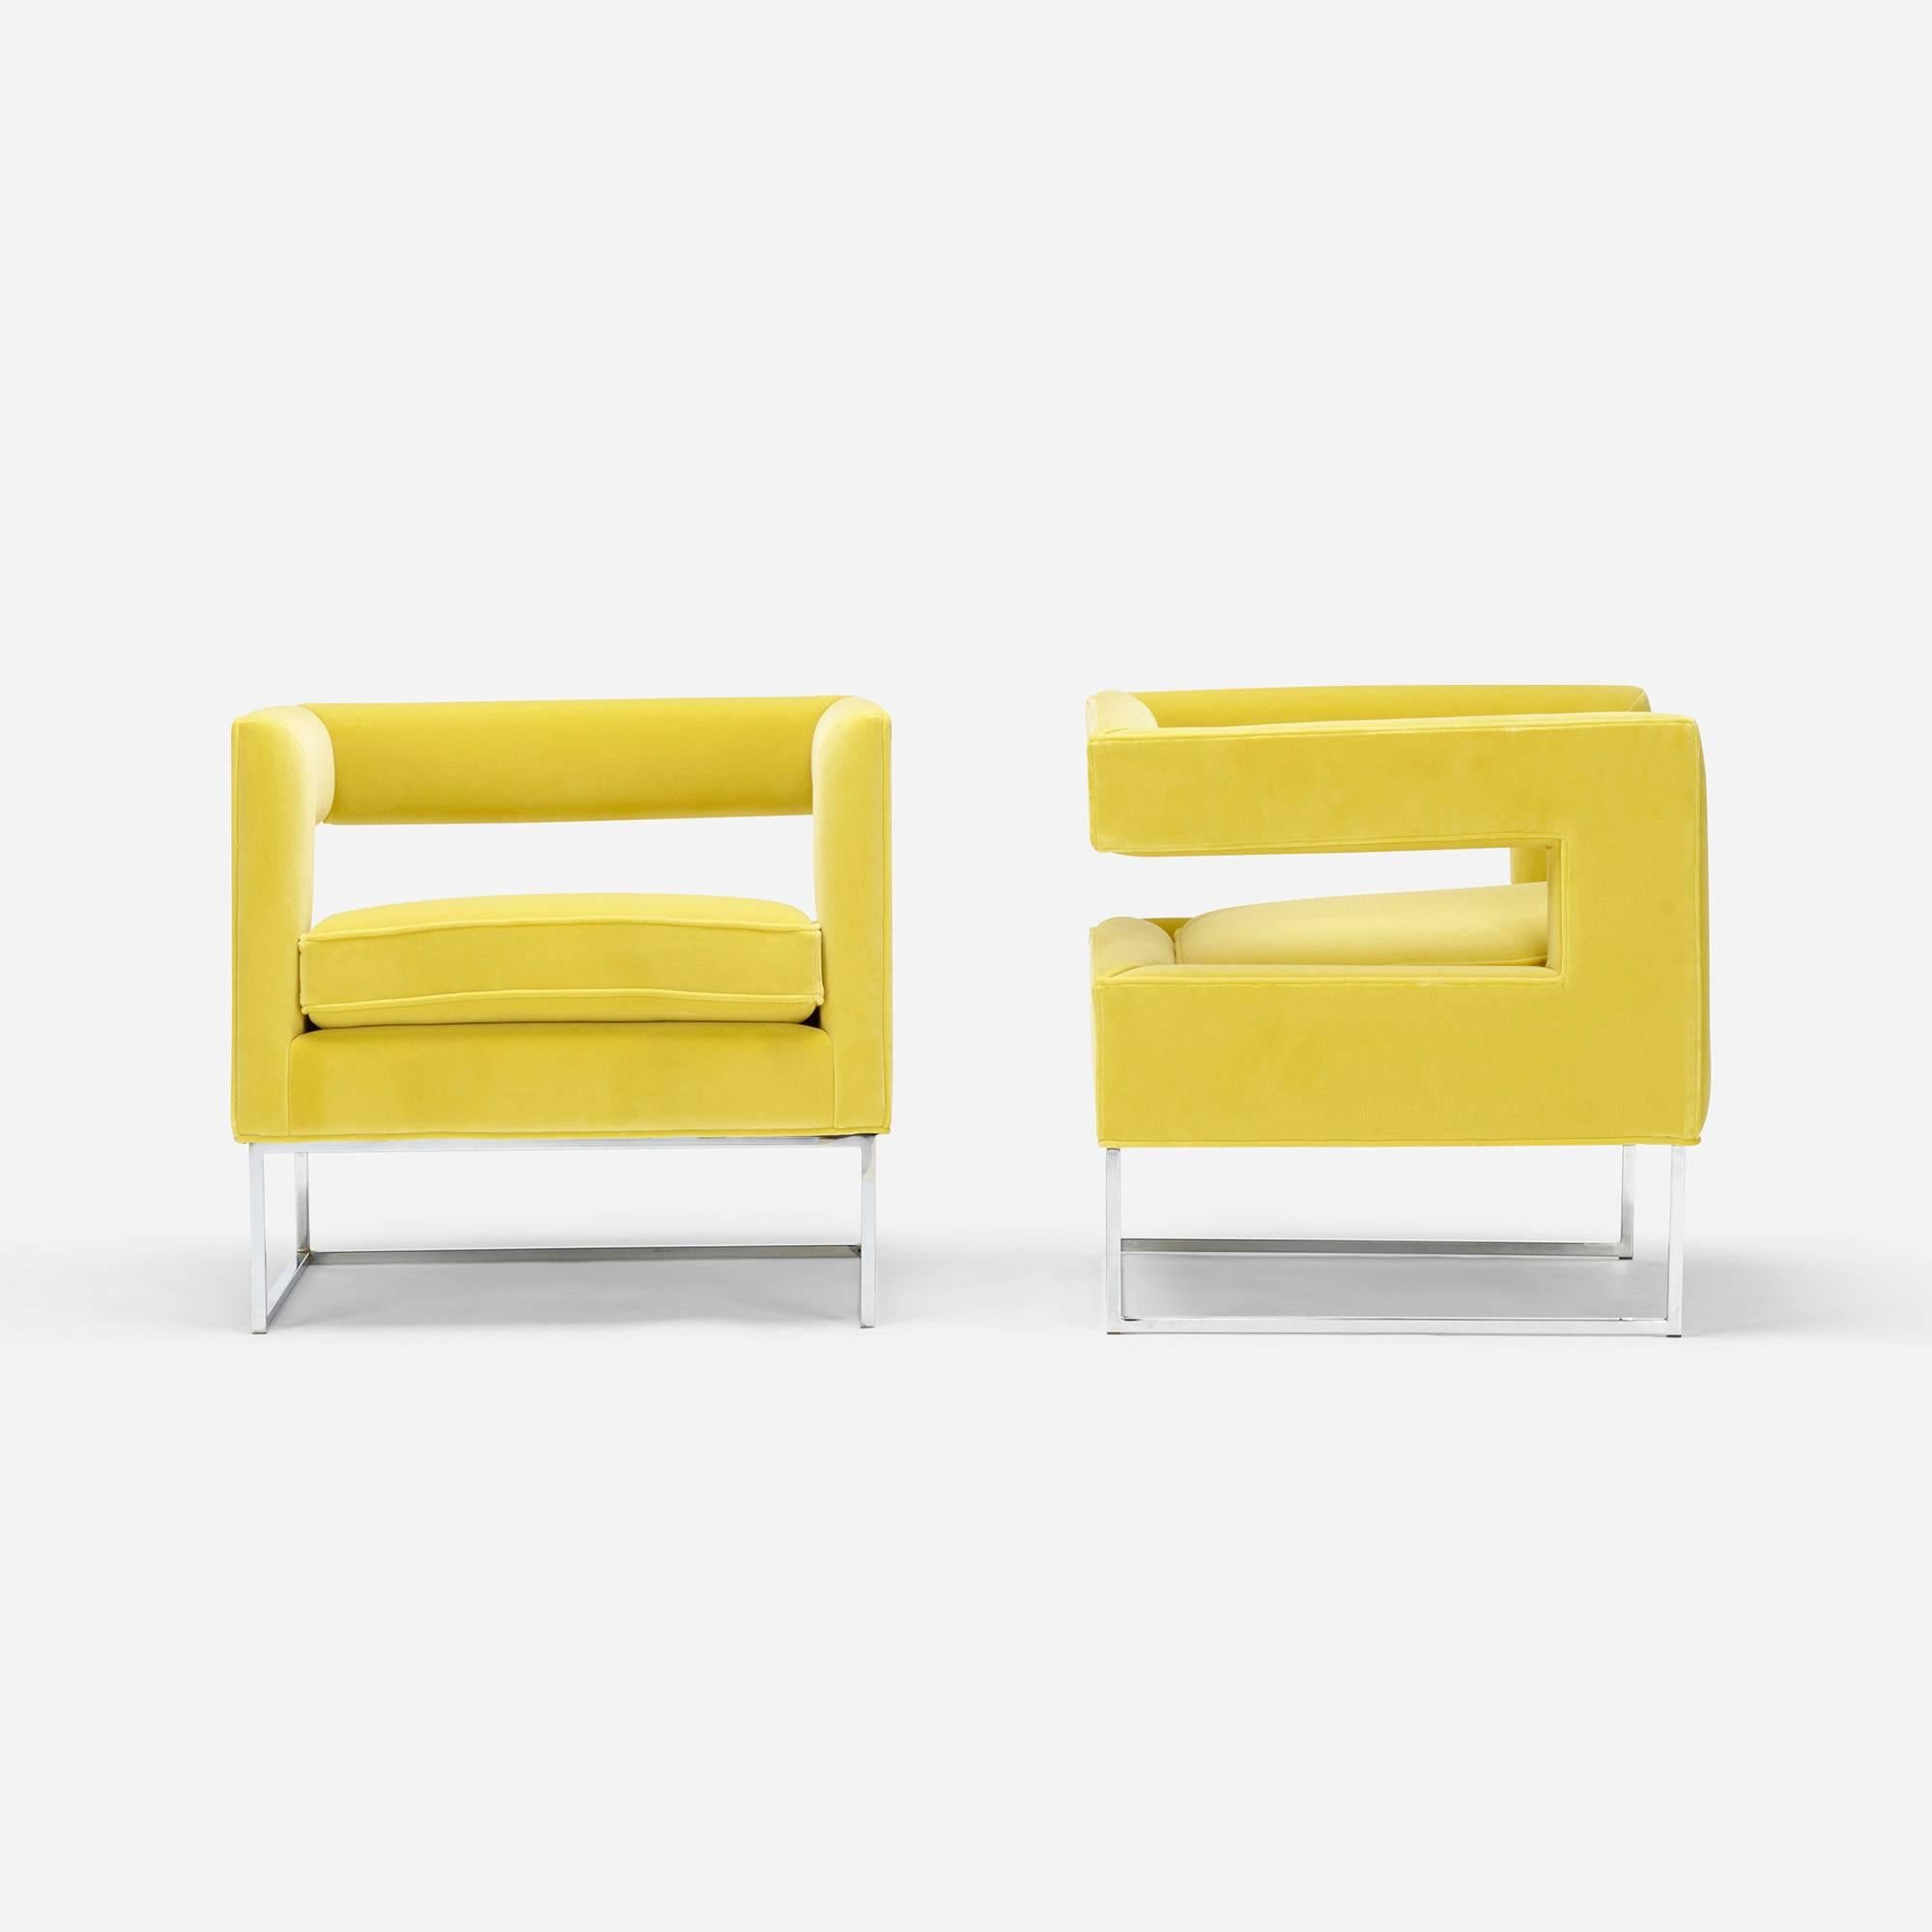 Chairs have been recently restored in a bright but pleasing yellow velvet. Stylish, compact and visually light, these would be ideal for nearly any setting.